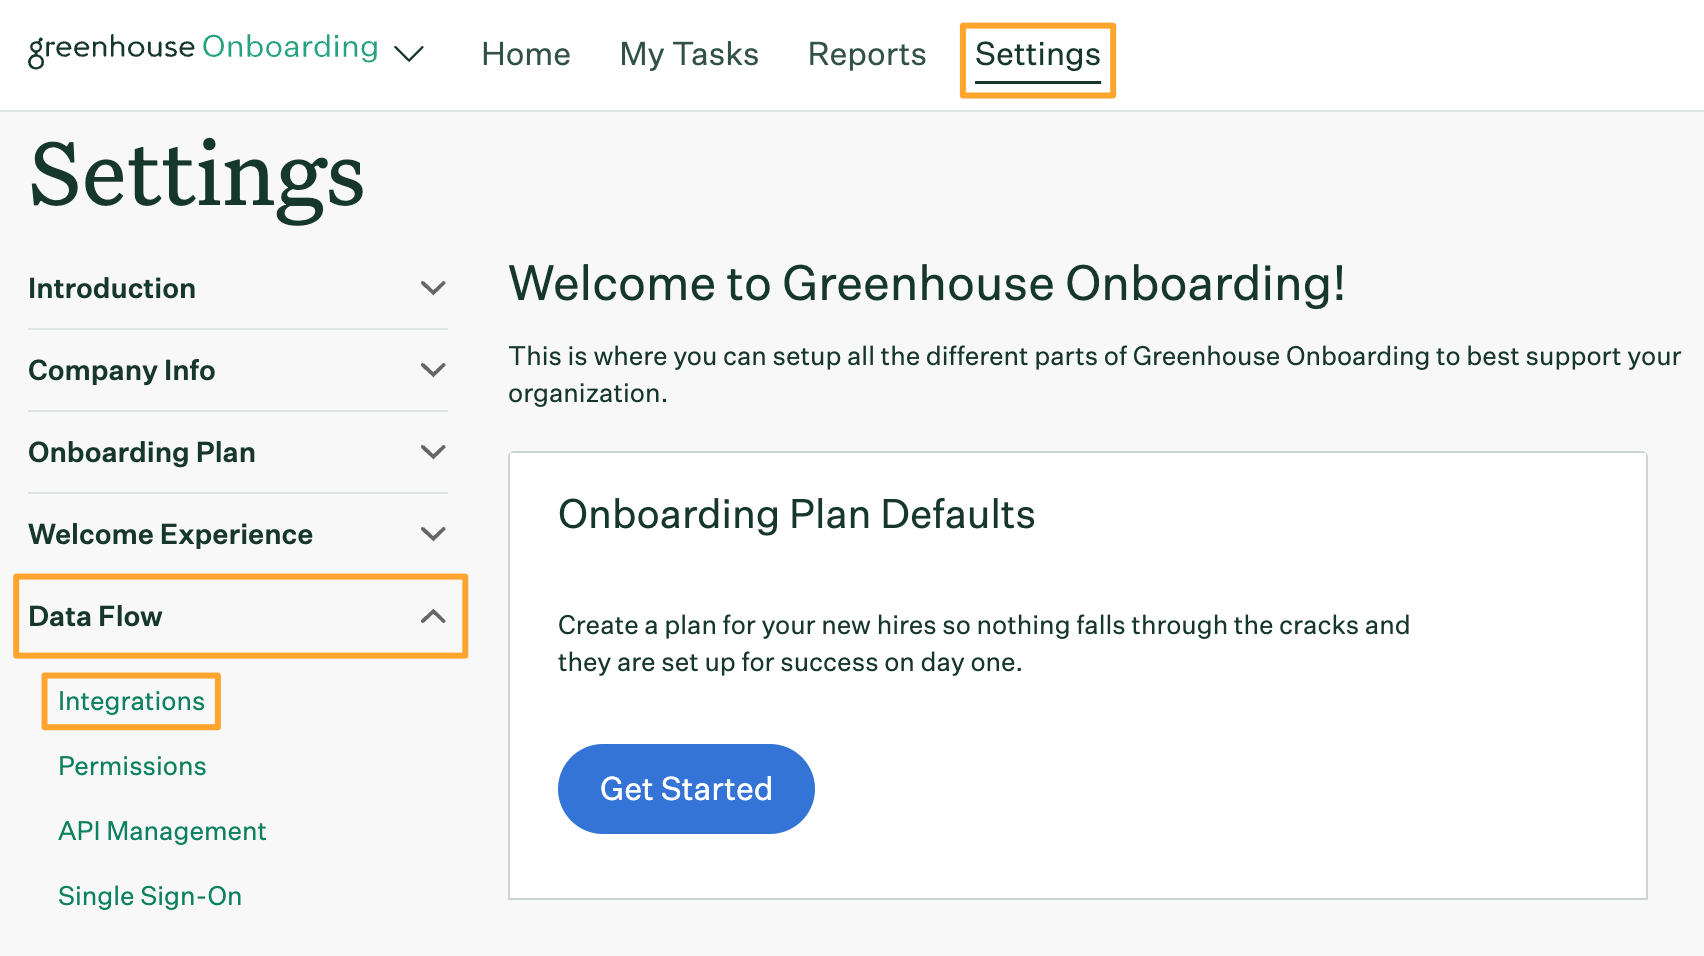 Greenhouse Onboarding Settings page with Data Flow and Integration tabs highlighted